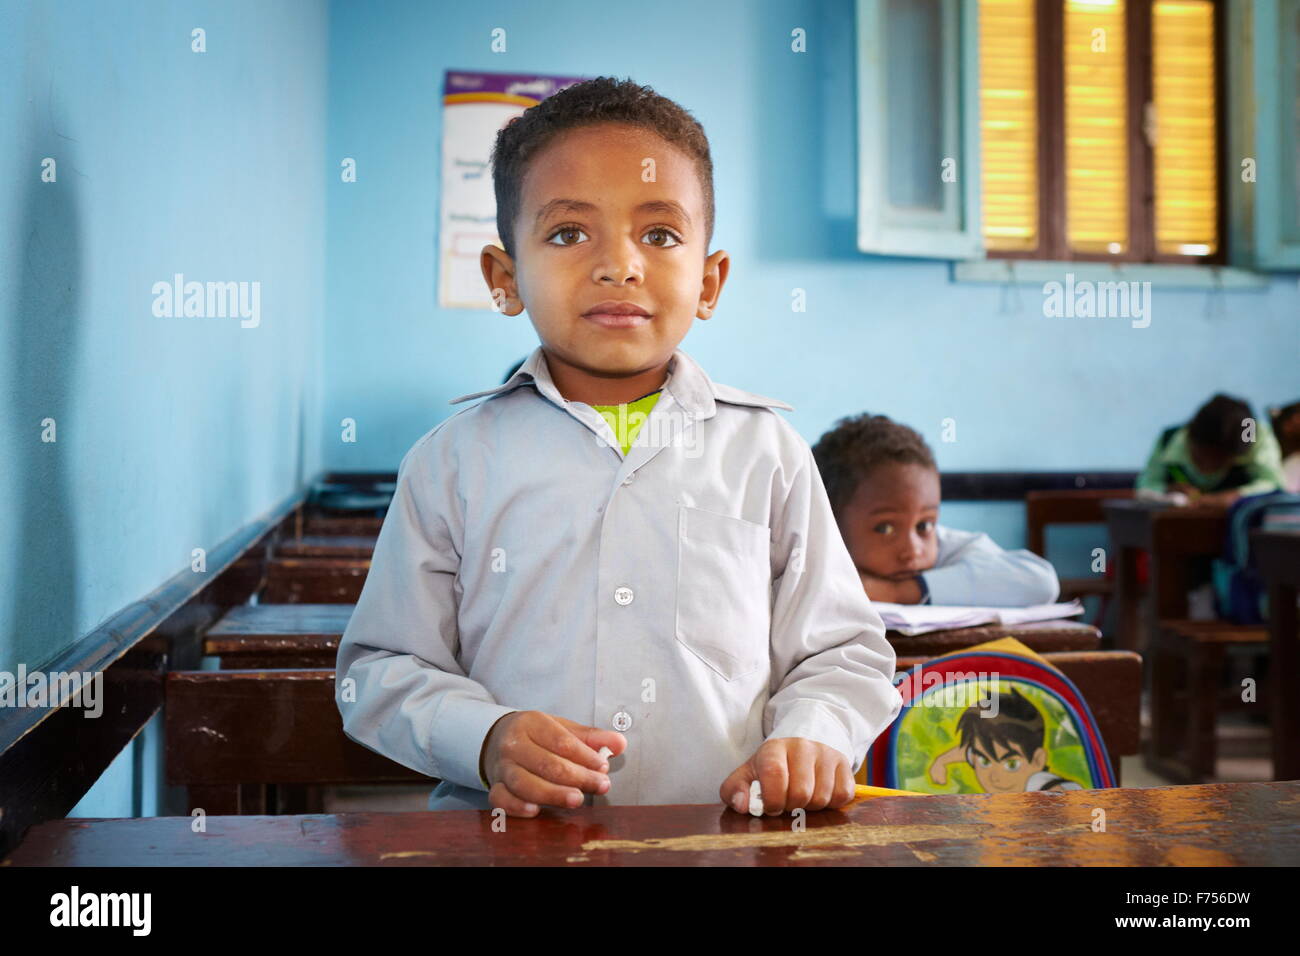 Egyptian child - Nubian village, portrait of the nubian boy, children learning in a classroom, Egypt Stock Photo